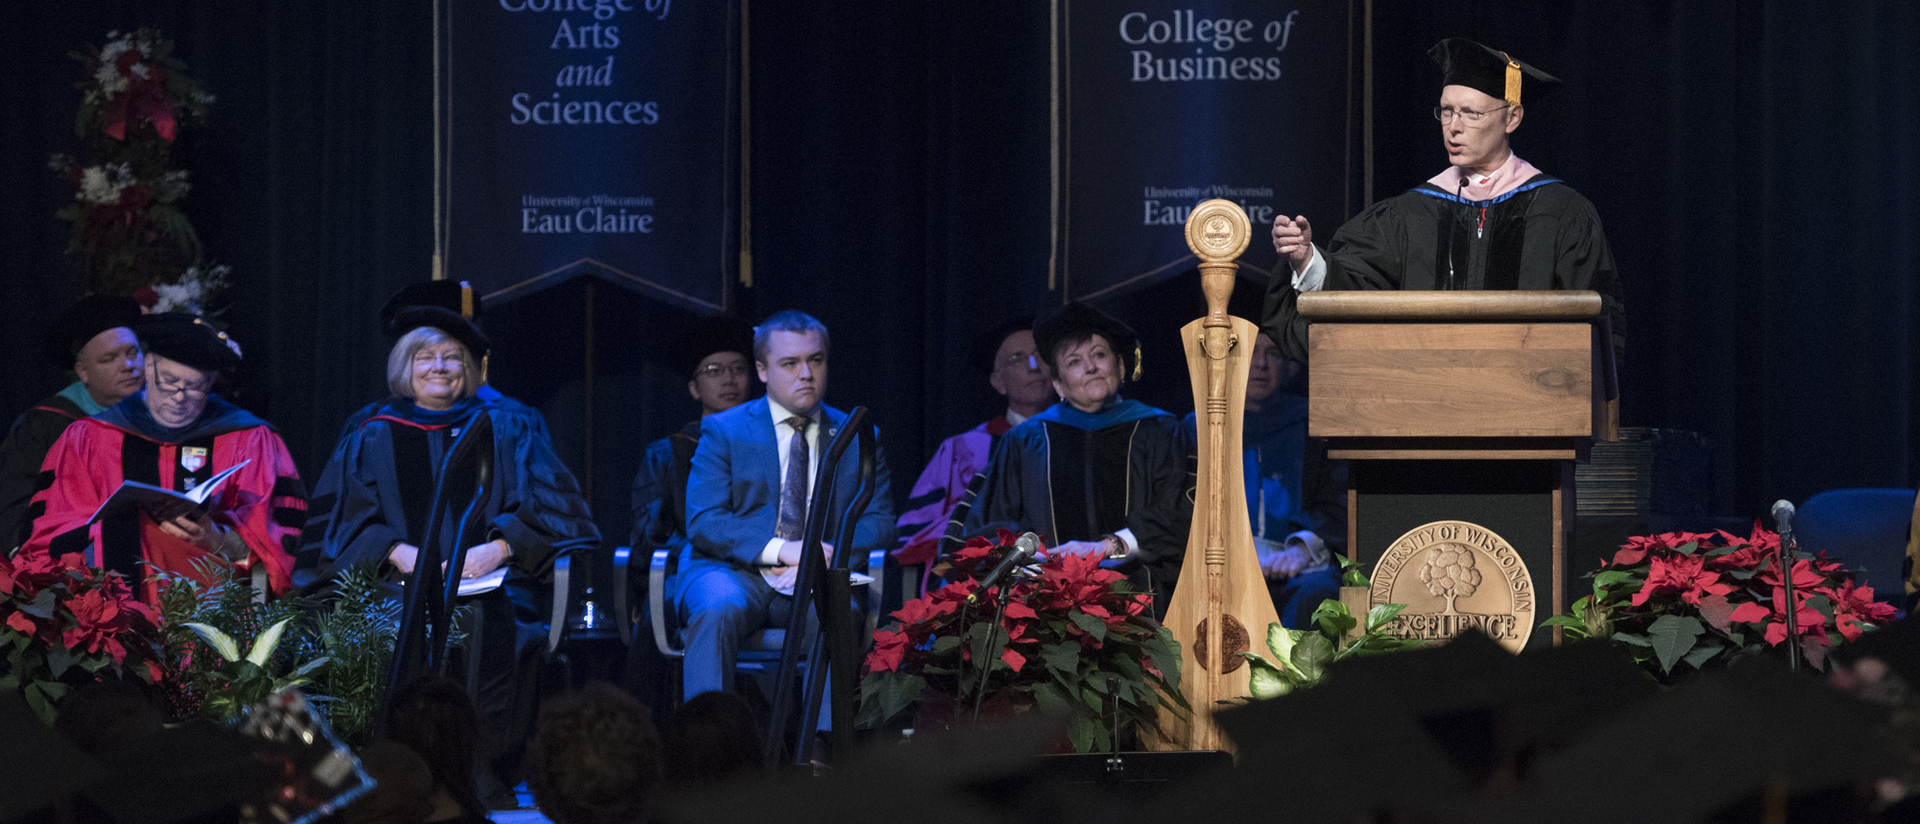 RG Conlee delivers winter 2017 commencement address